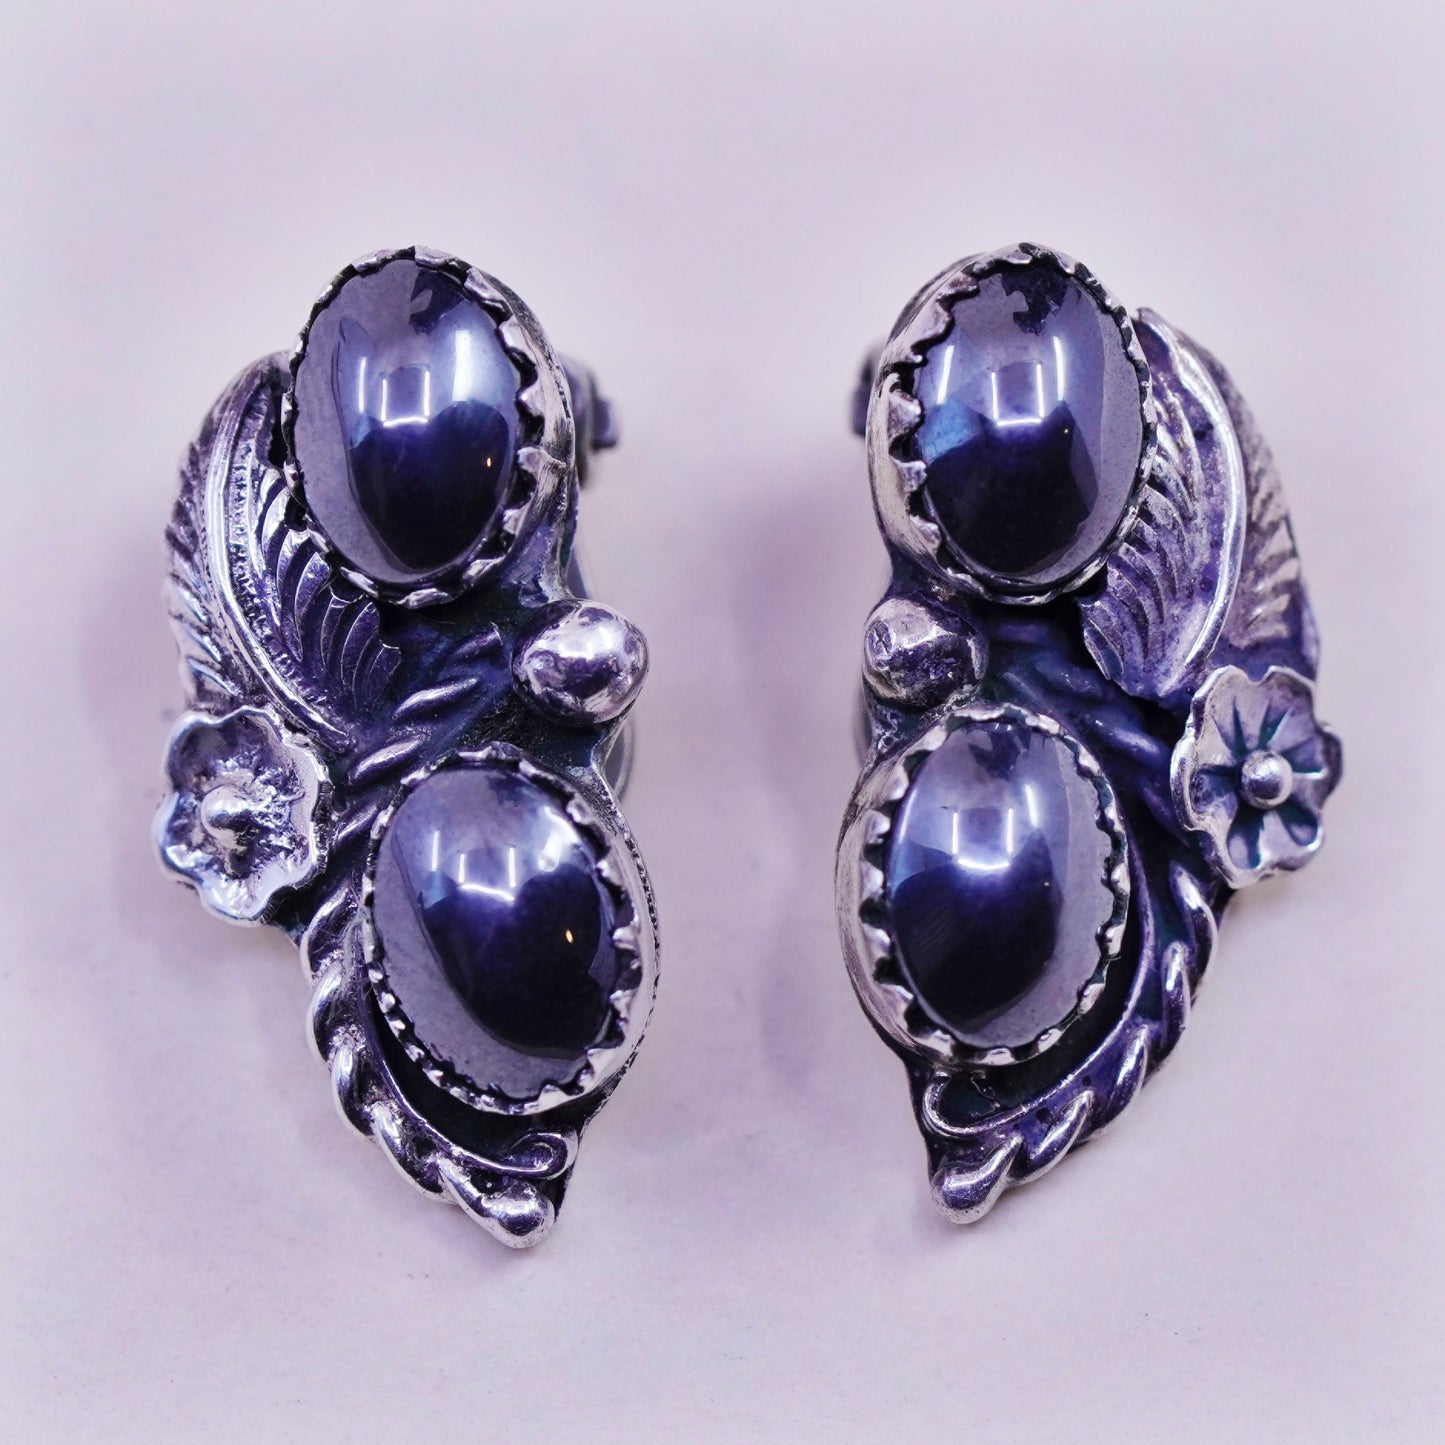 Vintage 925 Sterling silver handmade clip on leafy earrings with hematite